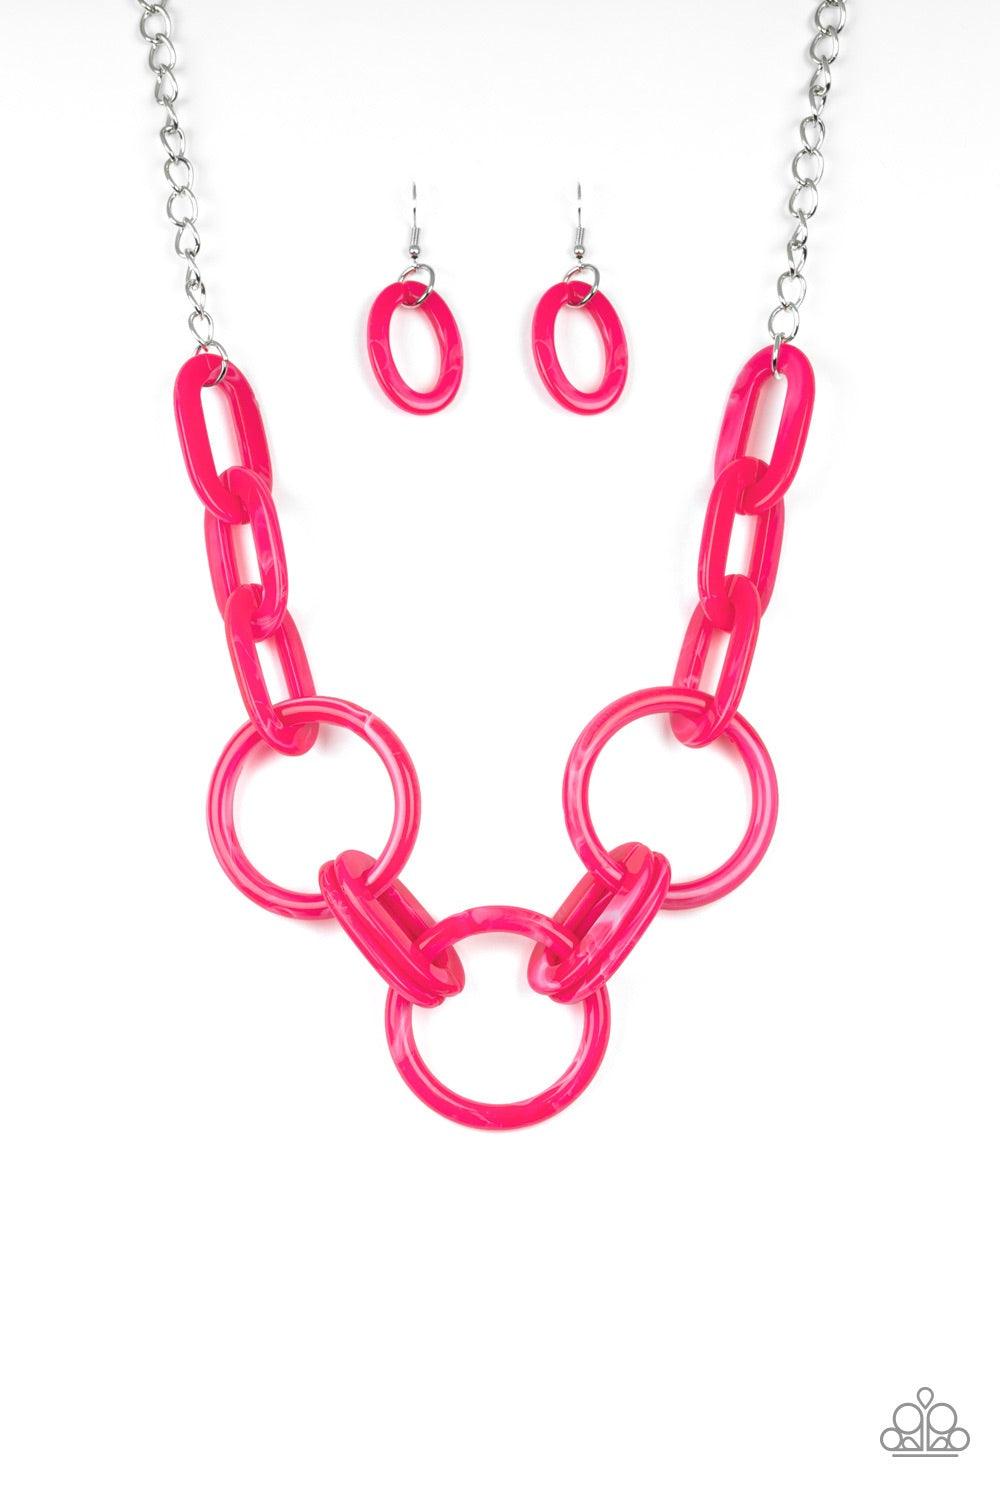 Paparazzi Accessories Turn Up The Heat - Pink Suspended from a shimmery silver chain, a collision of pink acrylic links connect below the collar in a statement-making fashion. Features an adjustable clasp closure. Jewelry